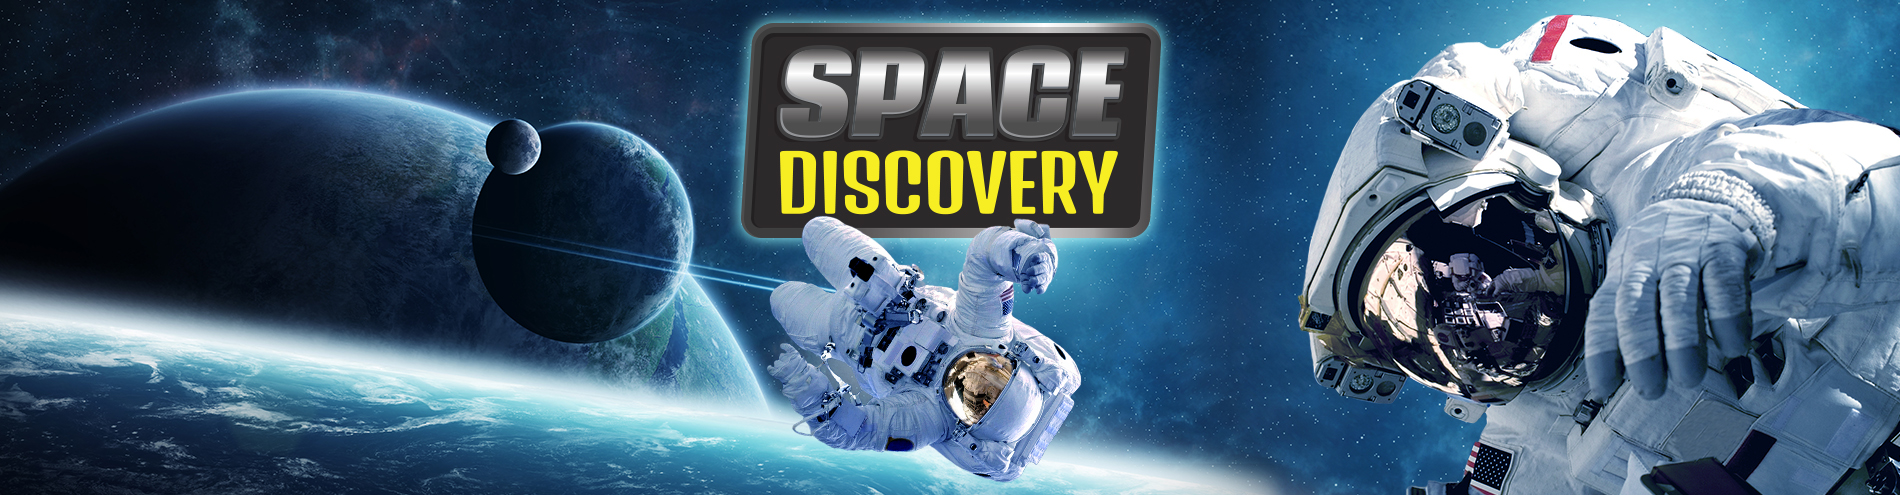 Space Discovery Web Graphic